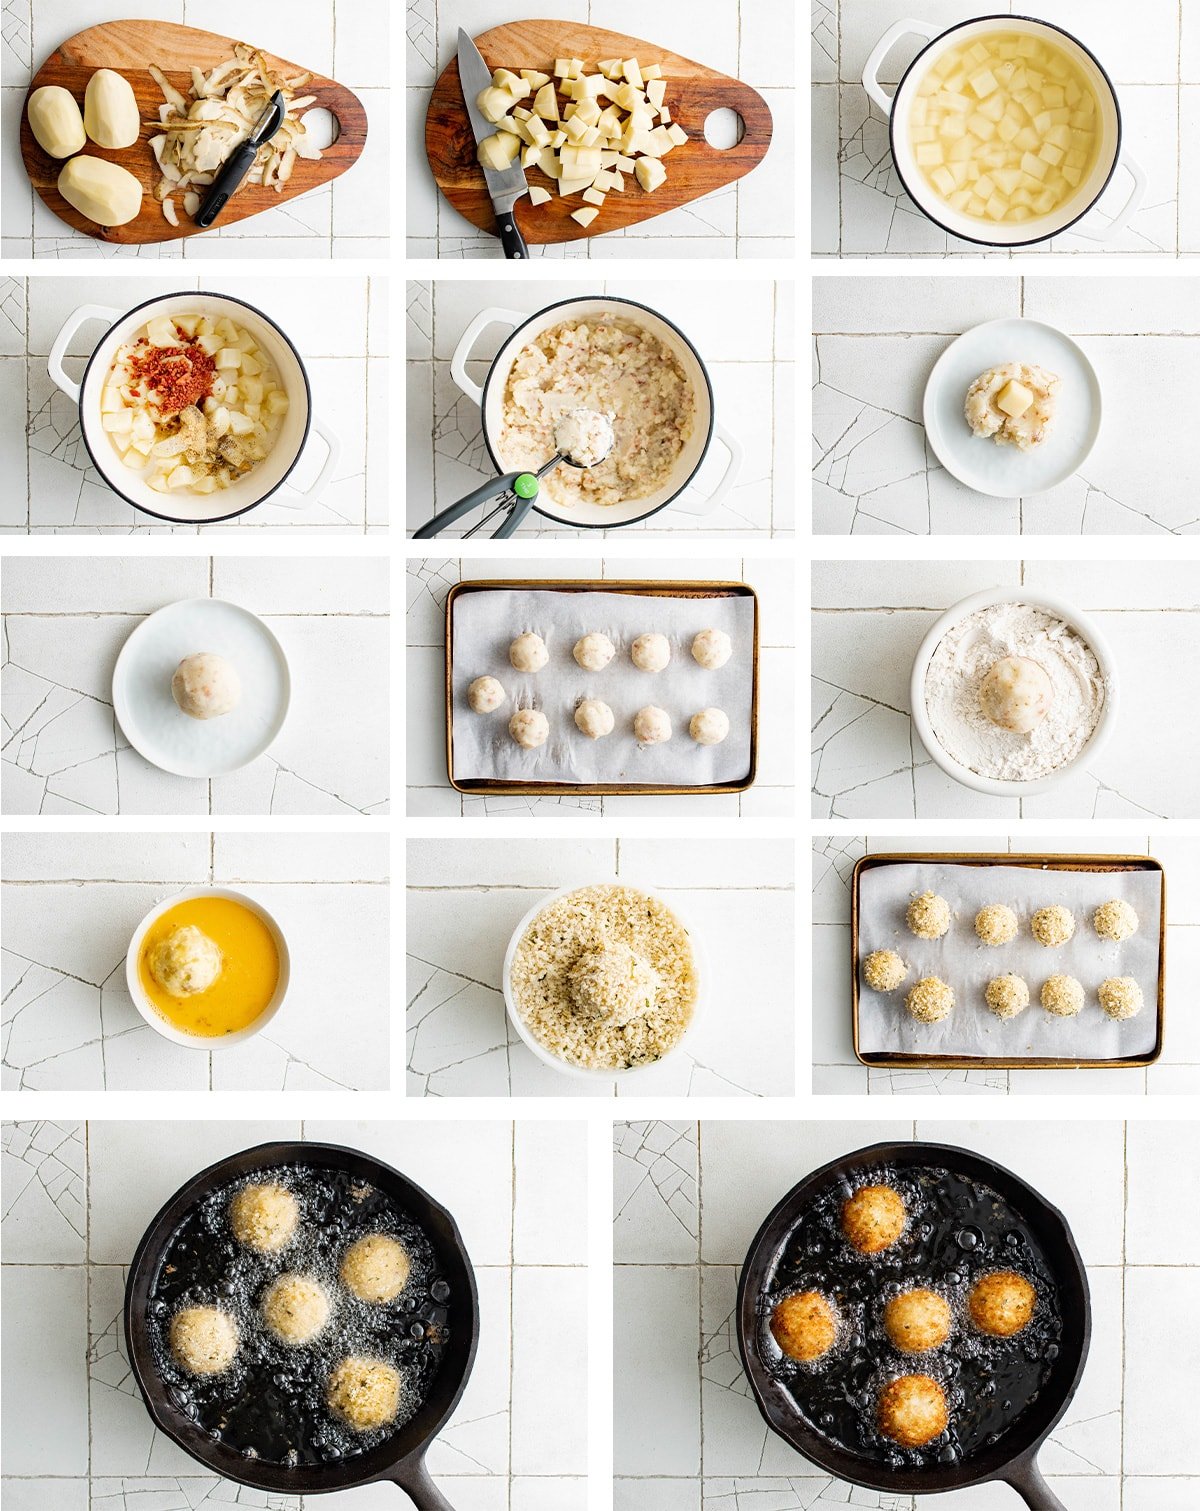 Collage of images showing how to make fried potato cheese balls.